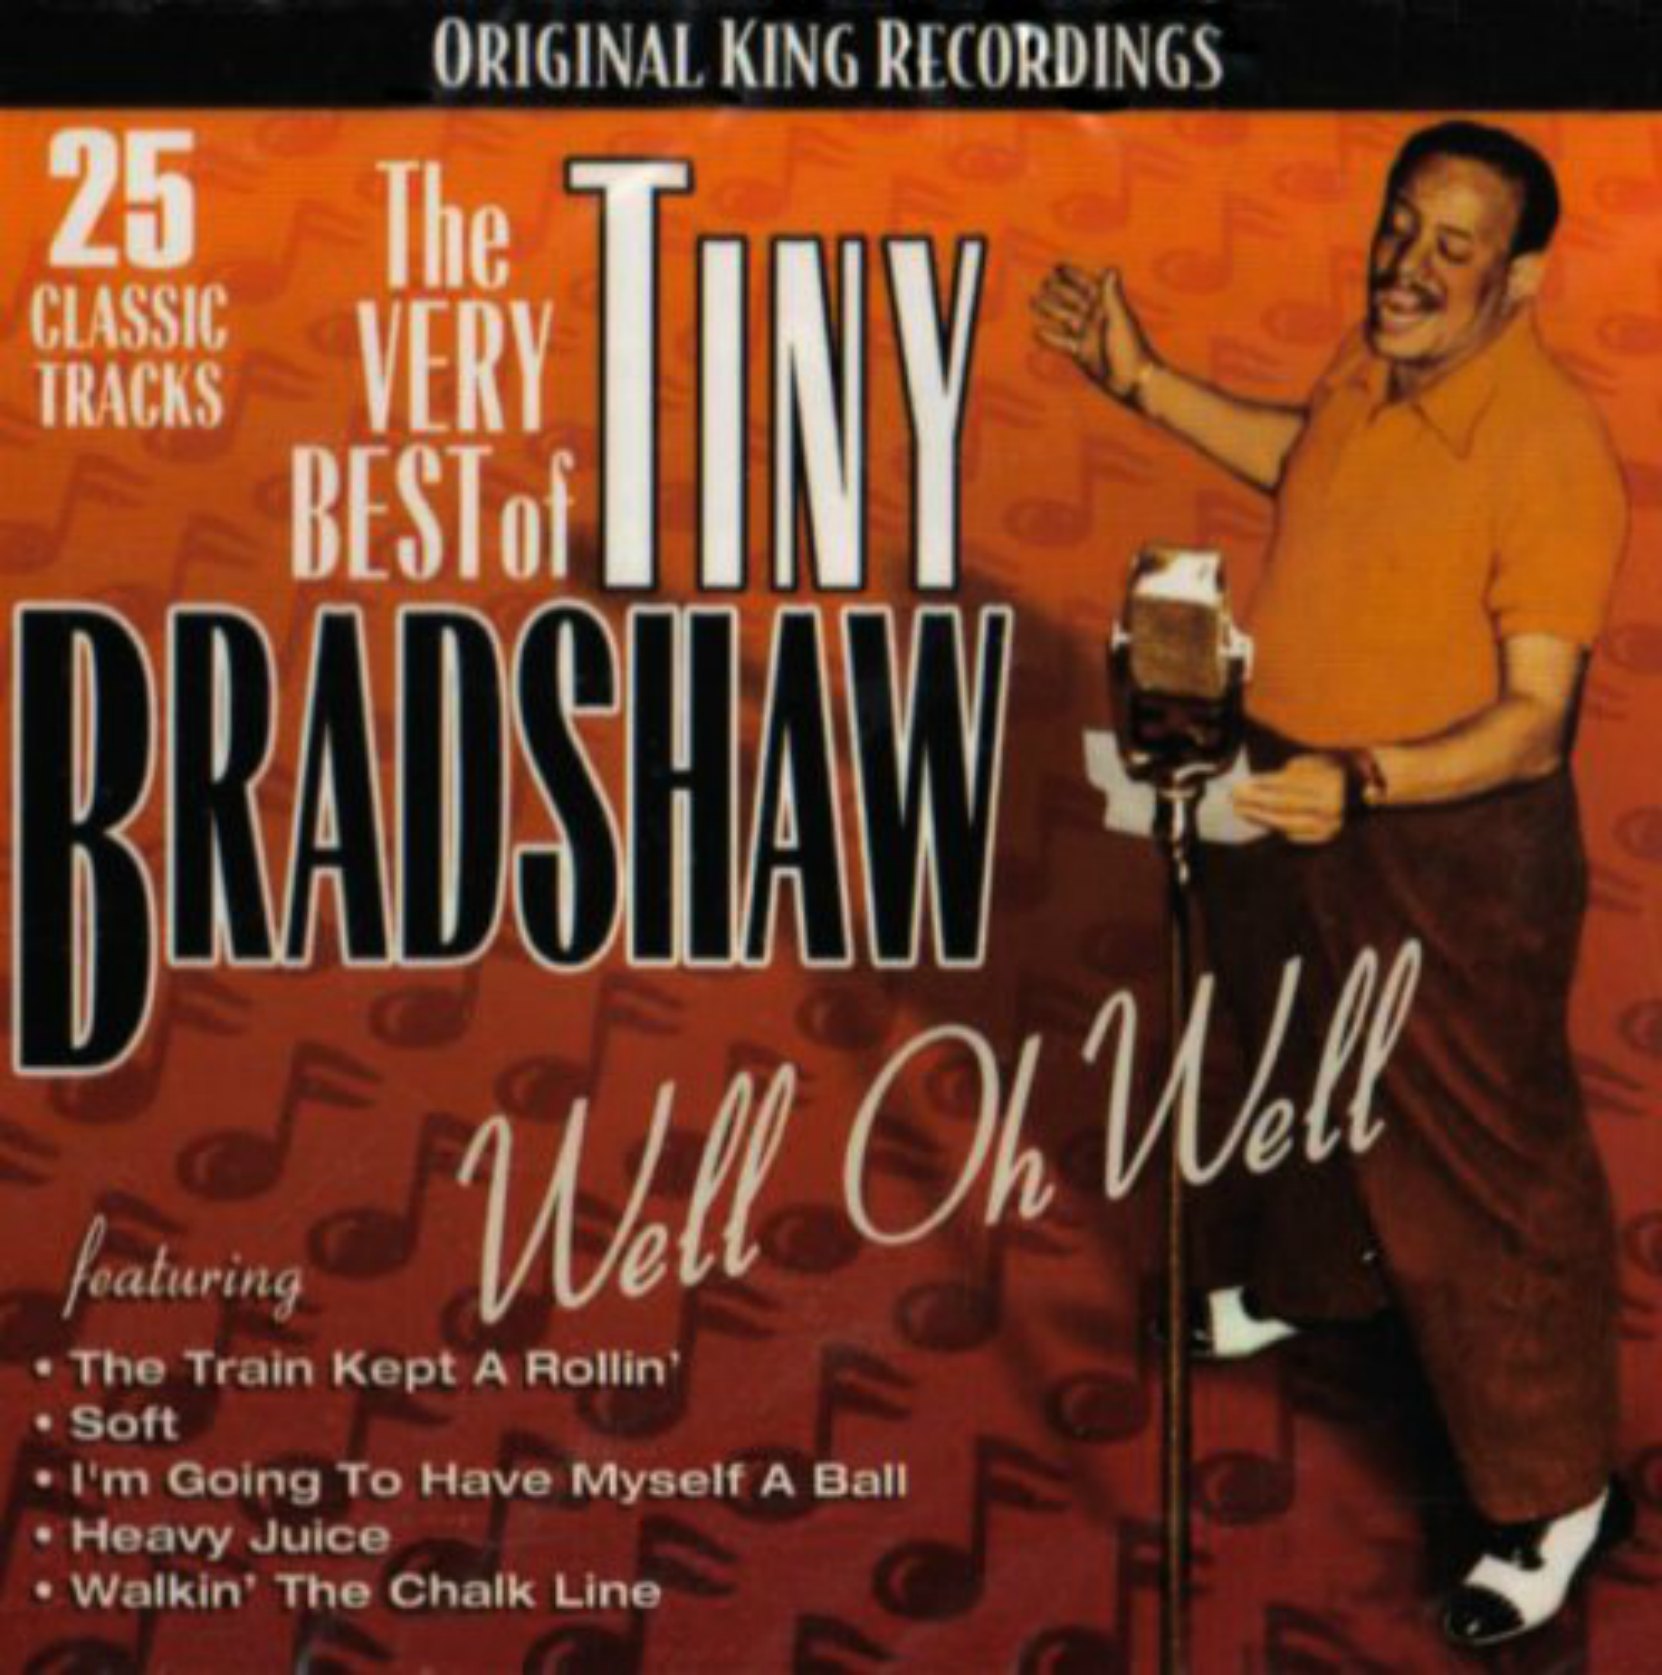 CD cover, The Very Best of Tiny Bradshaw, King Records recordings.